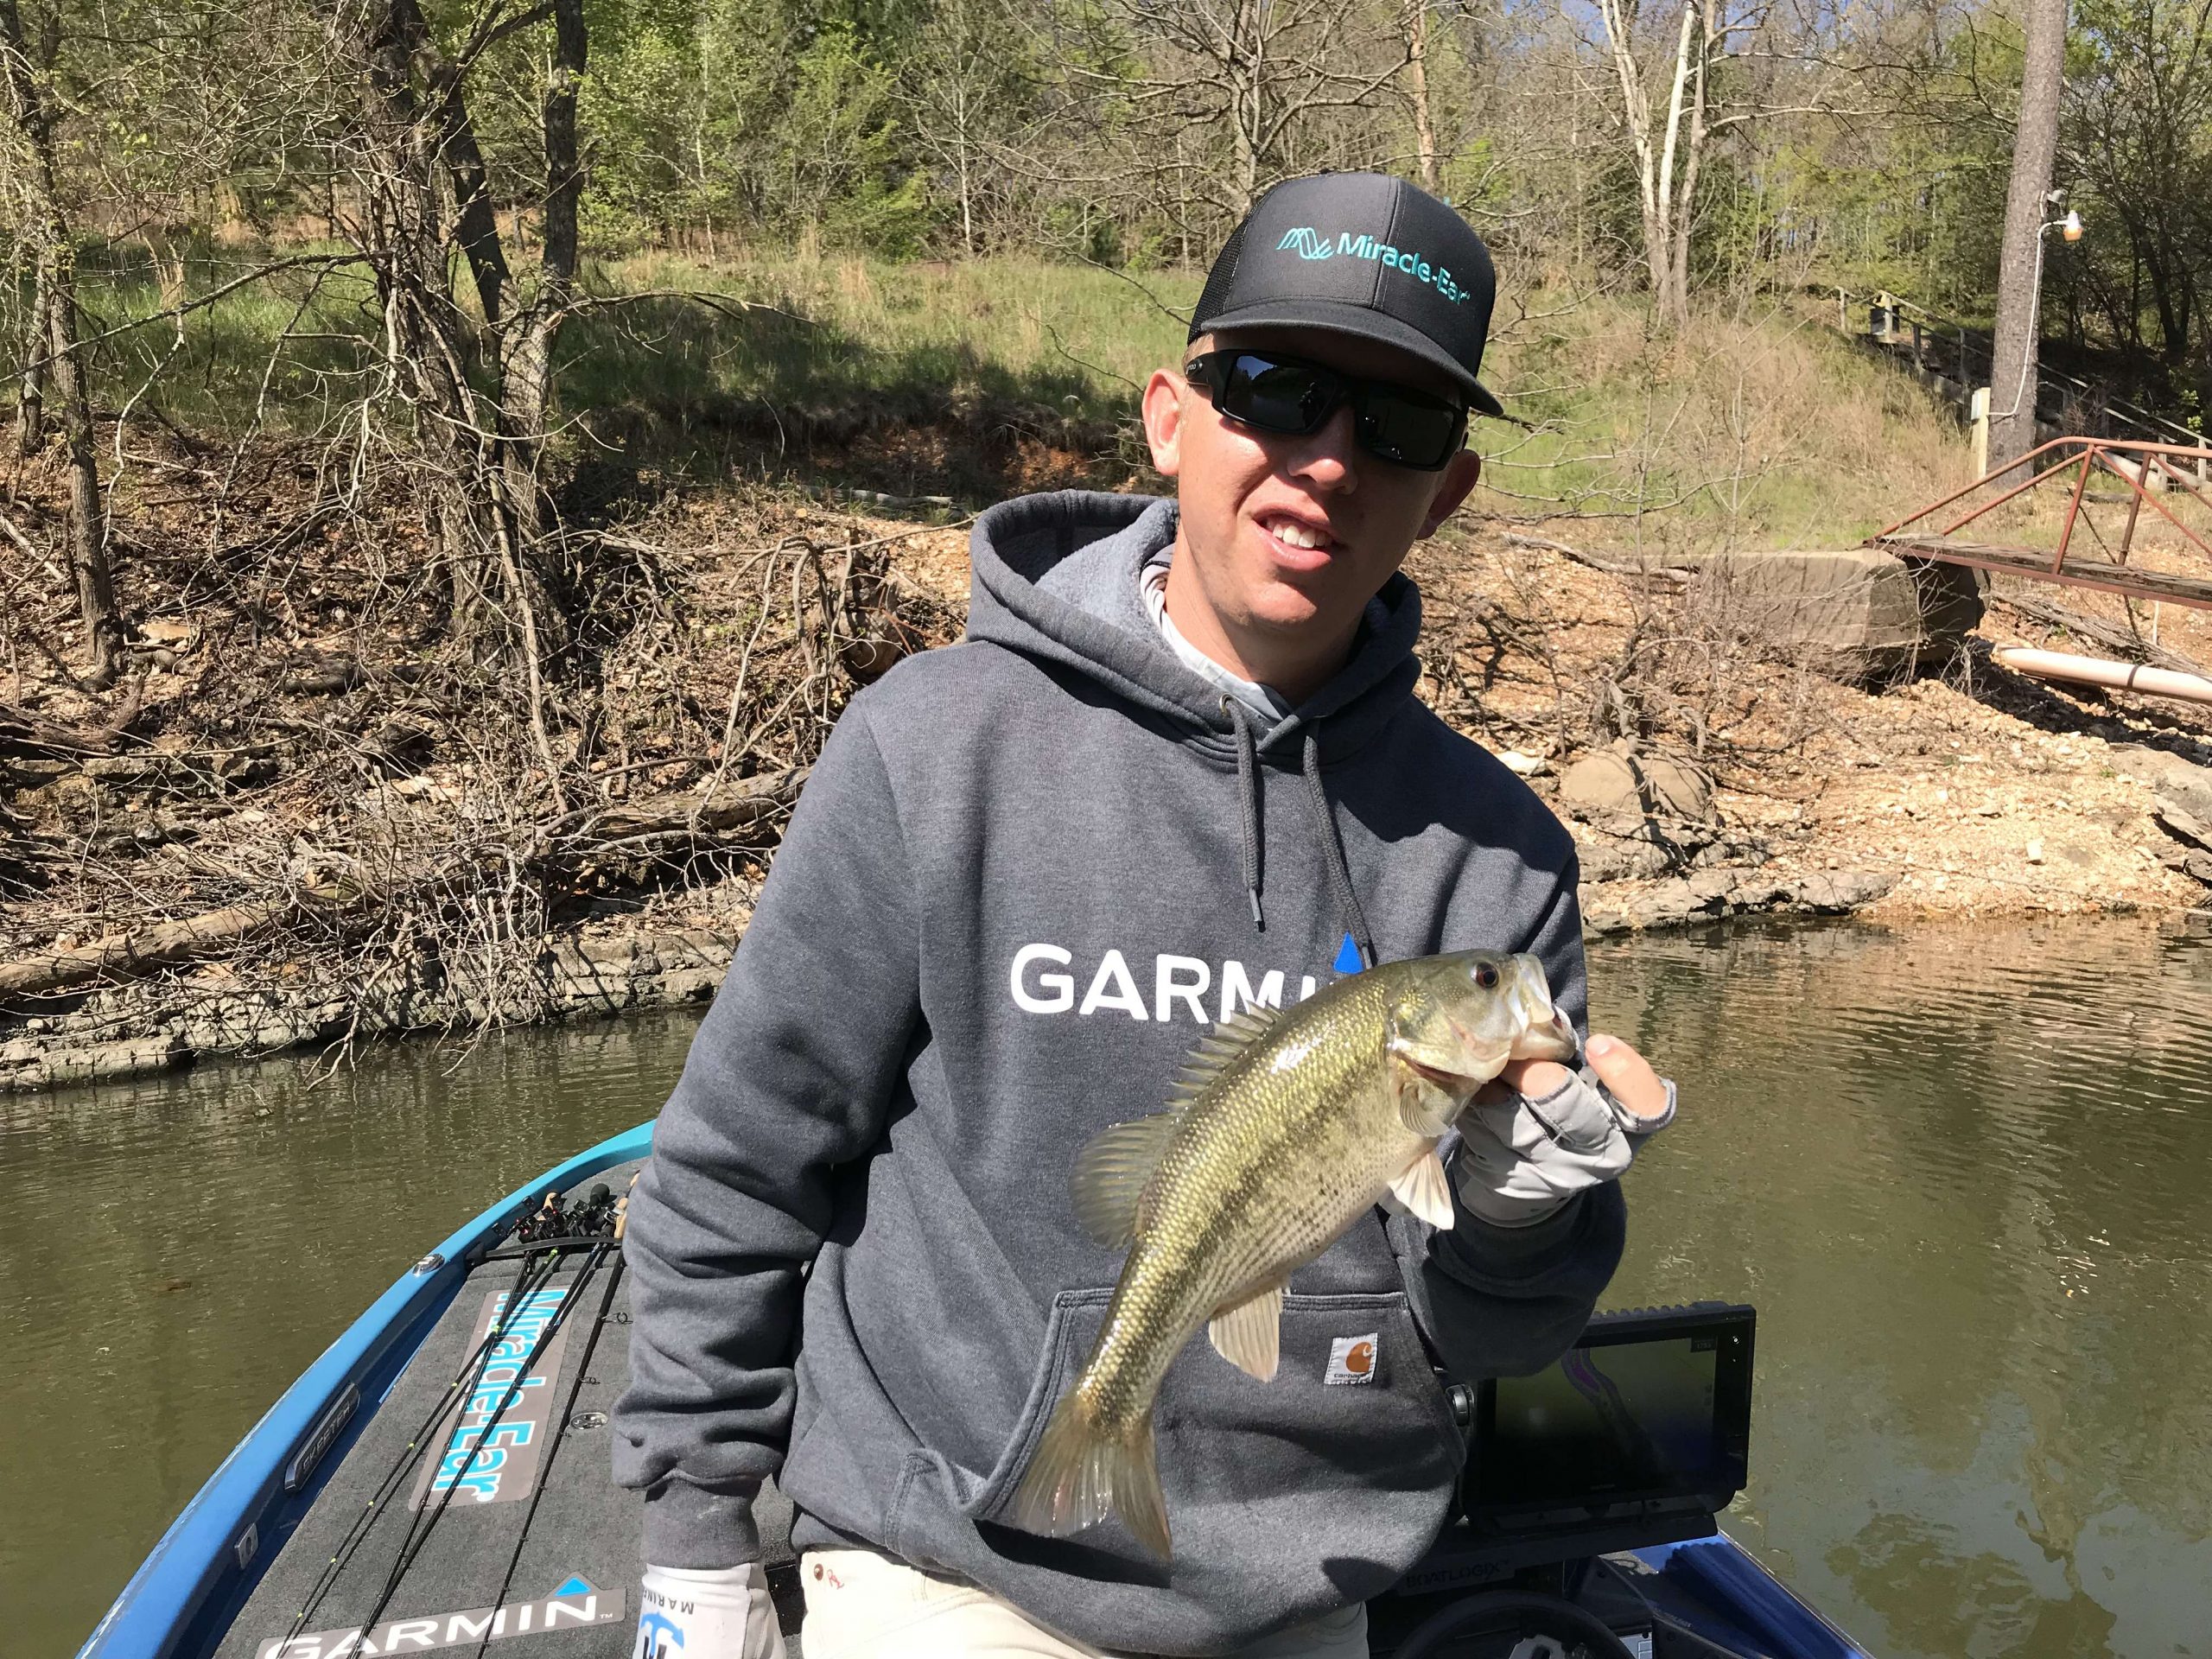 With 3 fish catches in under 15 minutes, Alton Jr. is beginning to pick up some steam and gain some confidence. This one will cull. 